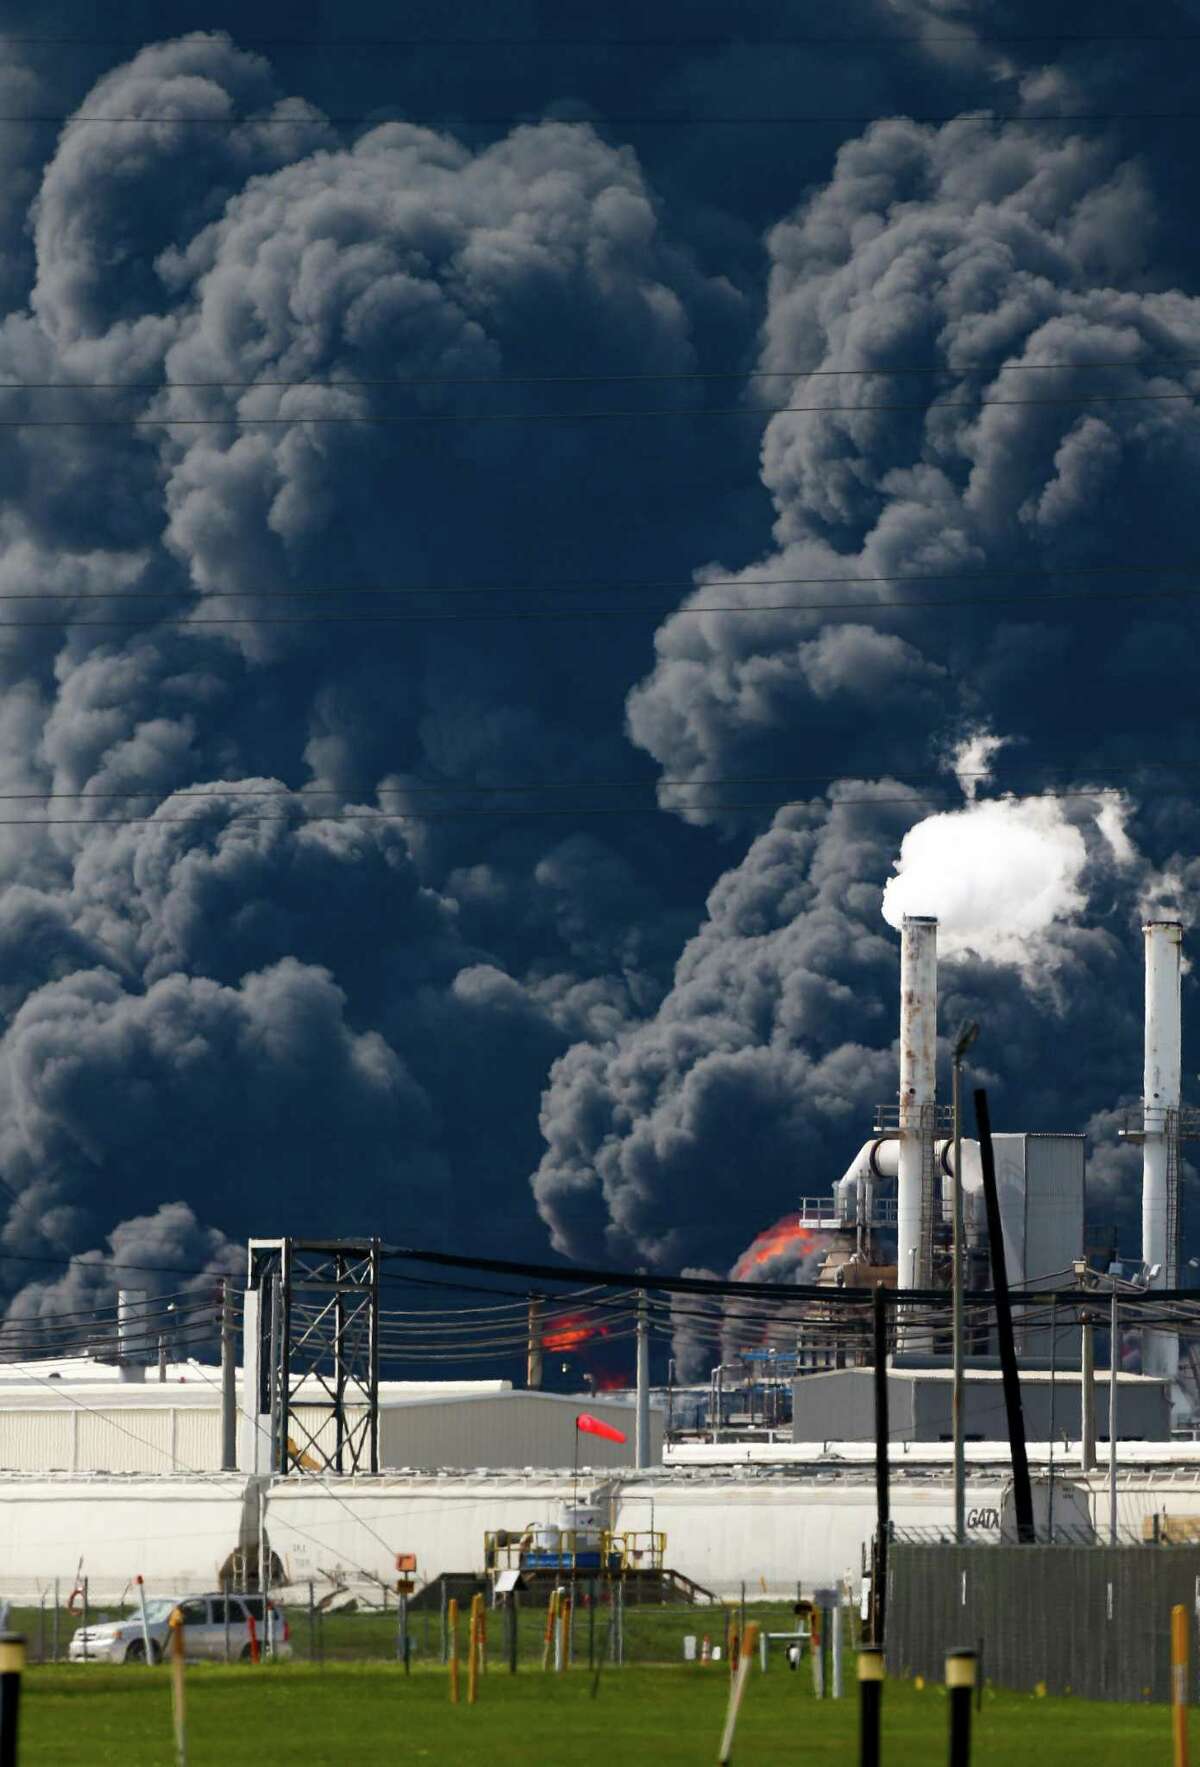 Firefighters battle the petrochemical fire at Intercontinental Terminals Company, which grew in size due to a lack of water pressure last night, Tuesday, March 19, 2019, in Deer Park, Texas.